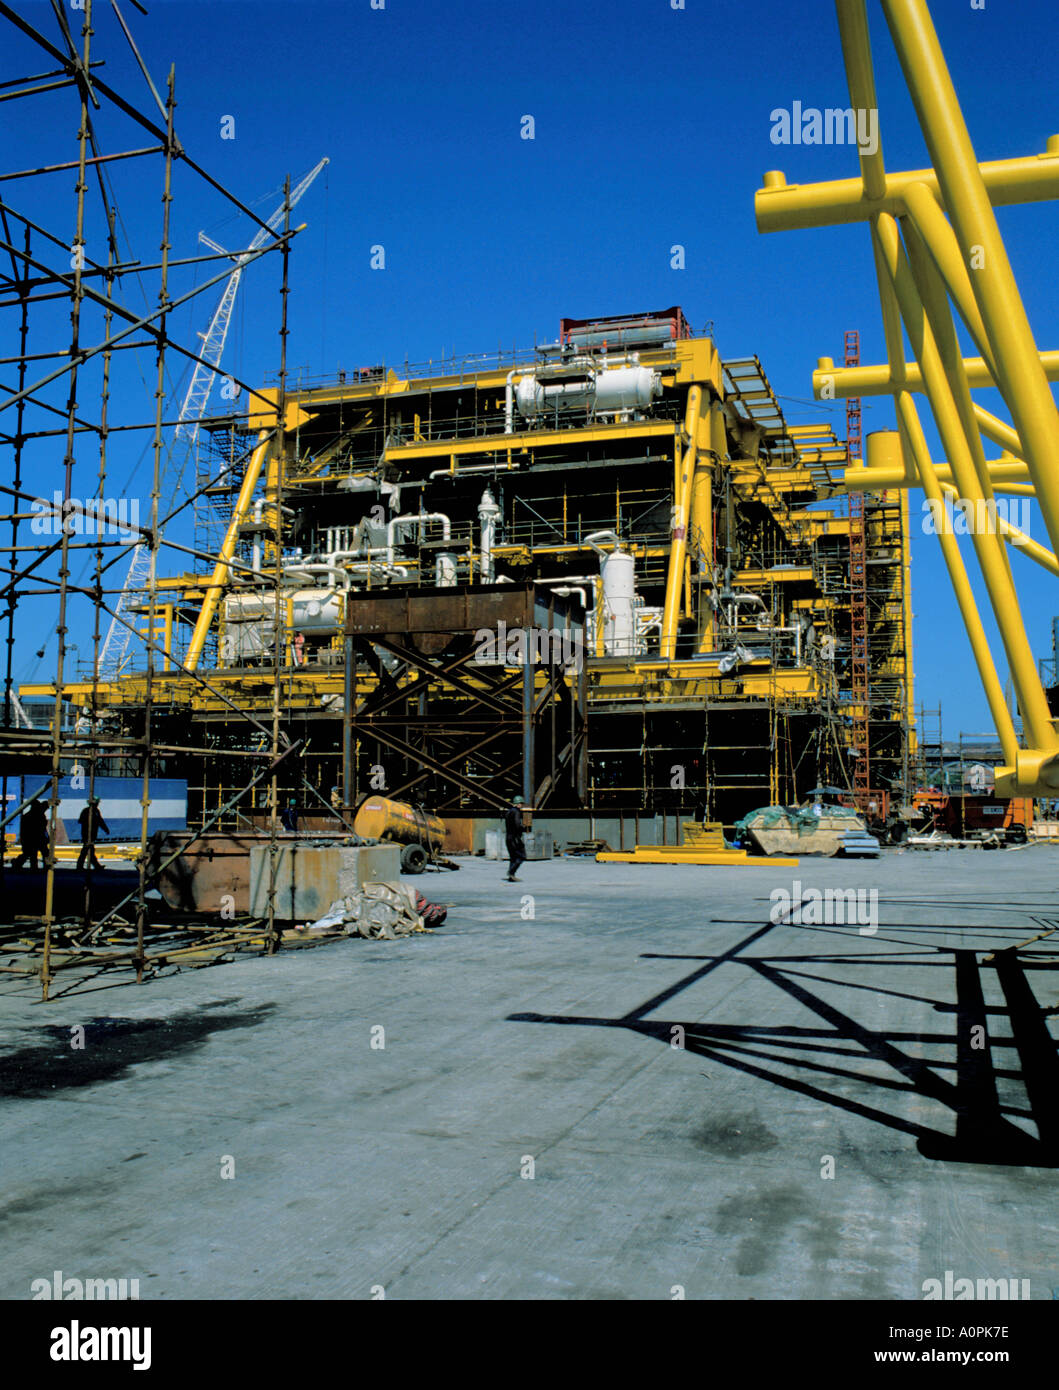 North Sea oil rig construction, Wallsend, Tyneside, in the late 1980s, Tyne and Wear, England, UK. Stock Photo